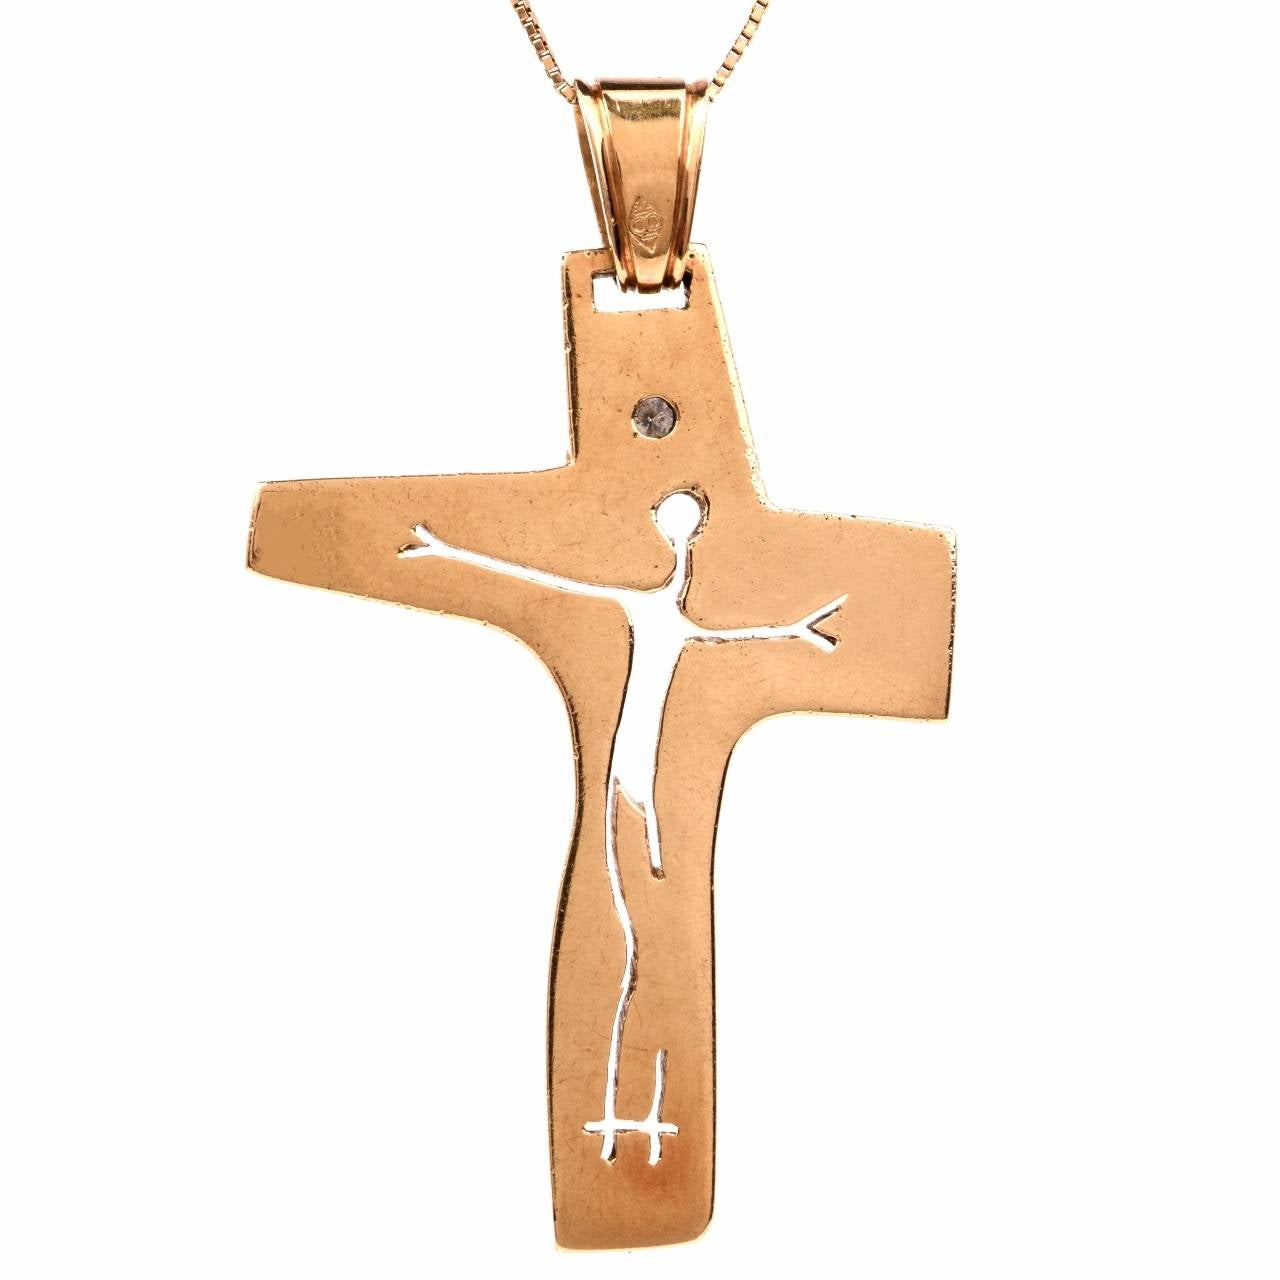 This Estate  cross pendant of unusual asymmetric design with an avant garde openwork silhouette simulating the Crucifix is handcrafted in solid 18K yellow gold, weighing 24.4 grams and measuring  60 x 34 mm (Inclusive of the bale). The creatively